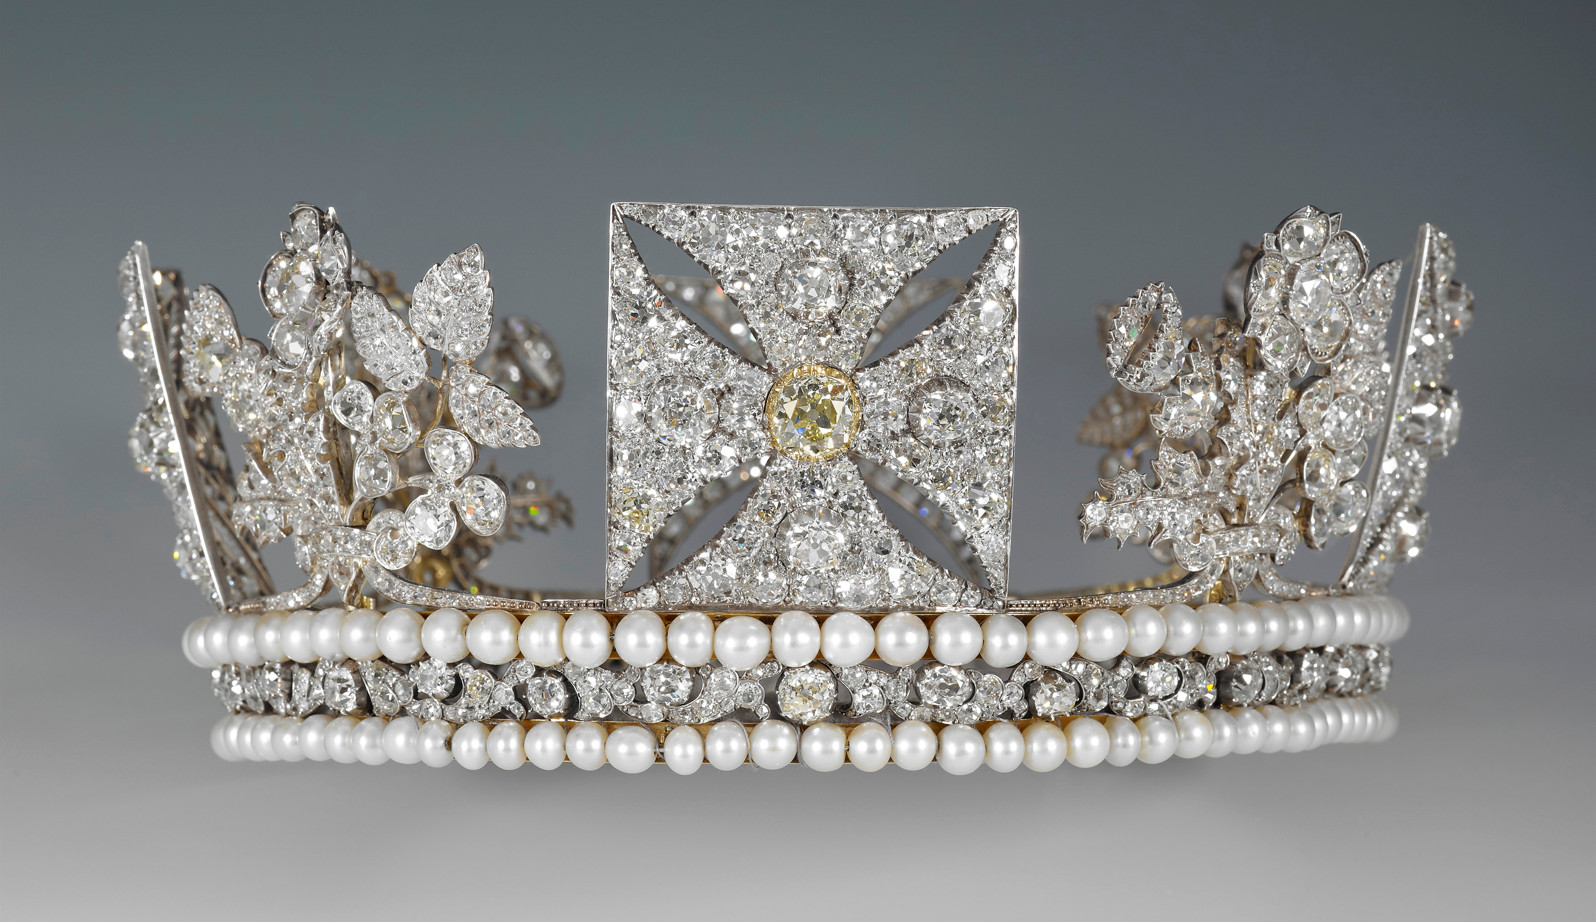 Her majesty the queen’s jewellery to feature in platinum jubilee displays at the official royal residences (1)